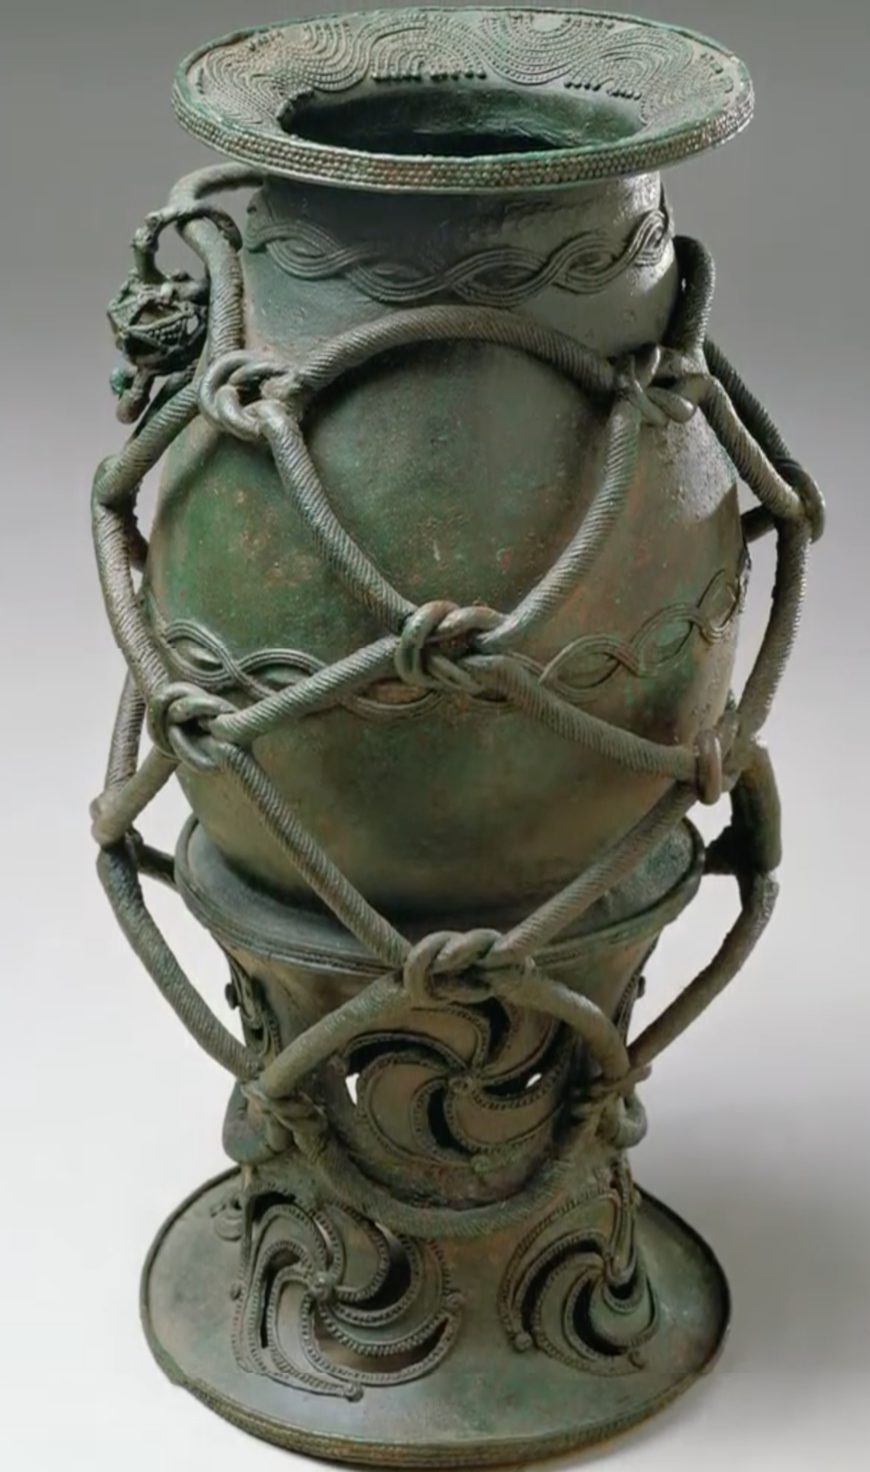 Vase with Rope from Igbo-Ukwu, Nigeria, c. 9th–11th century C.E., leaded bronze, 12 11/16 inches (National Museum, Lagos, Nigeria)